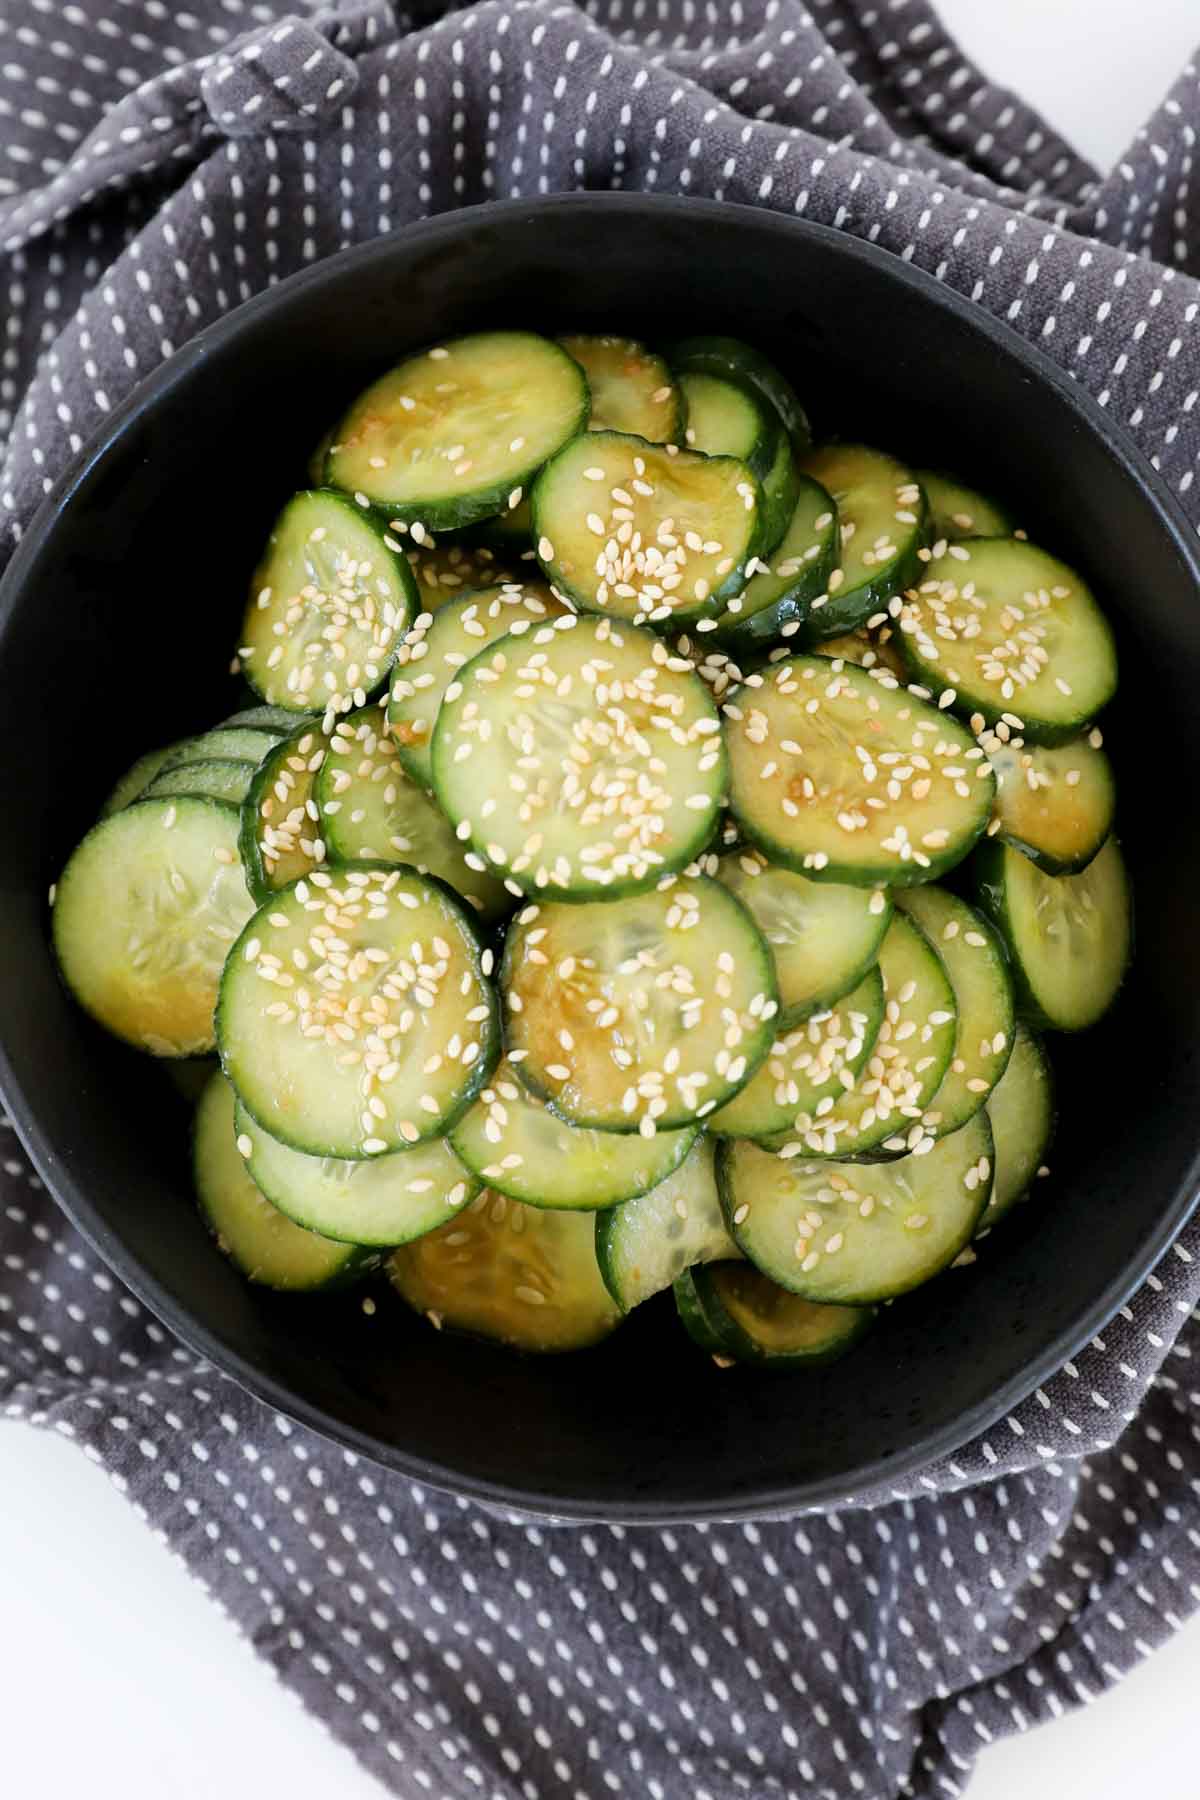 Cucumber salad sprinkled with toasted sesame seeds in a serving dish.